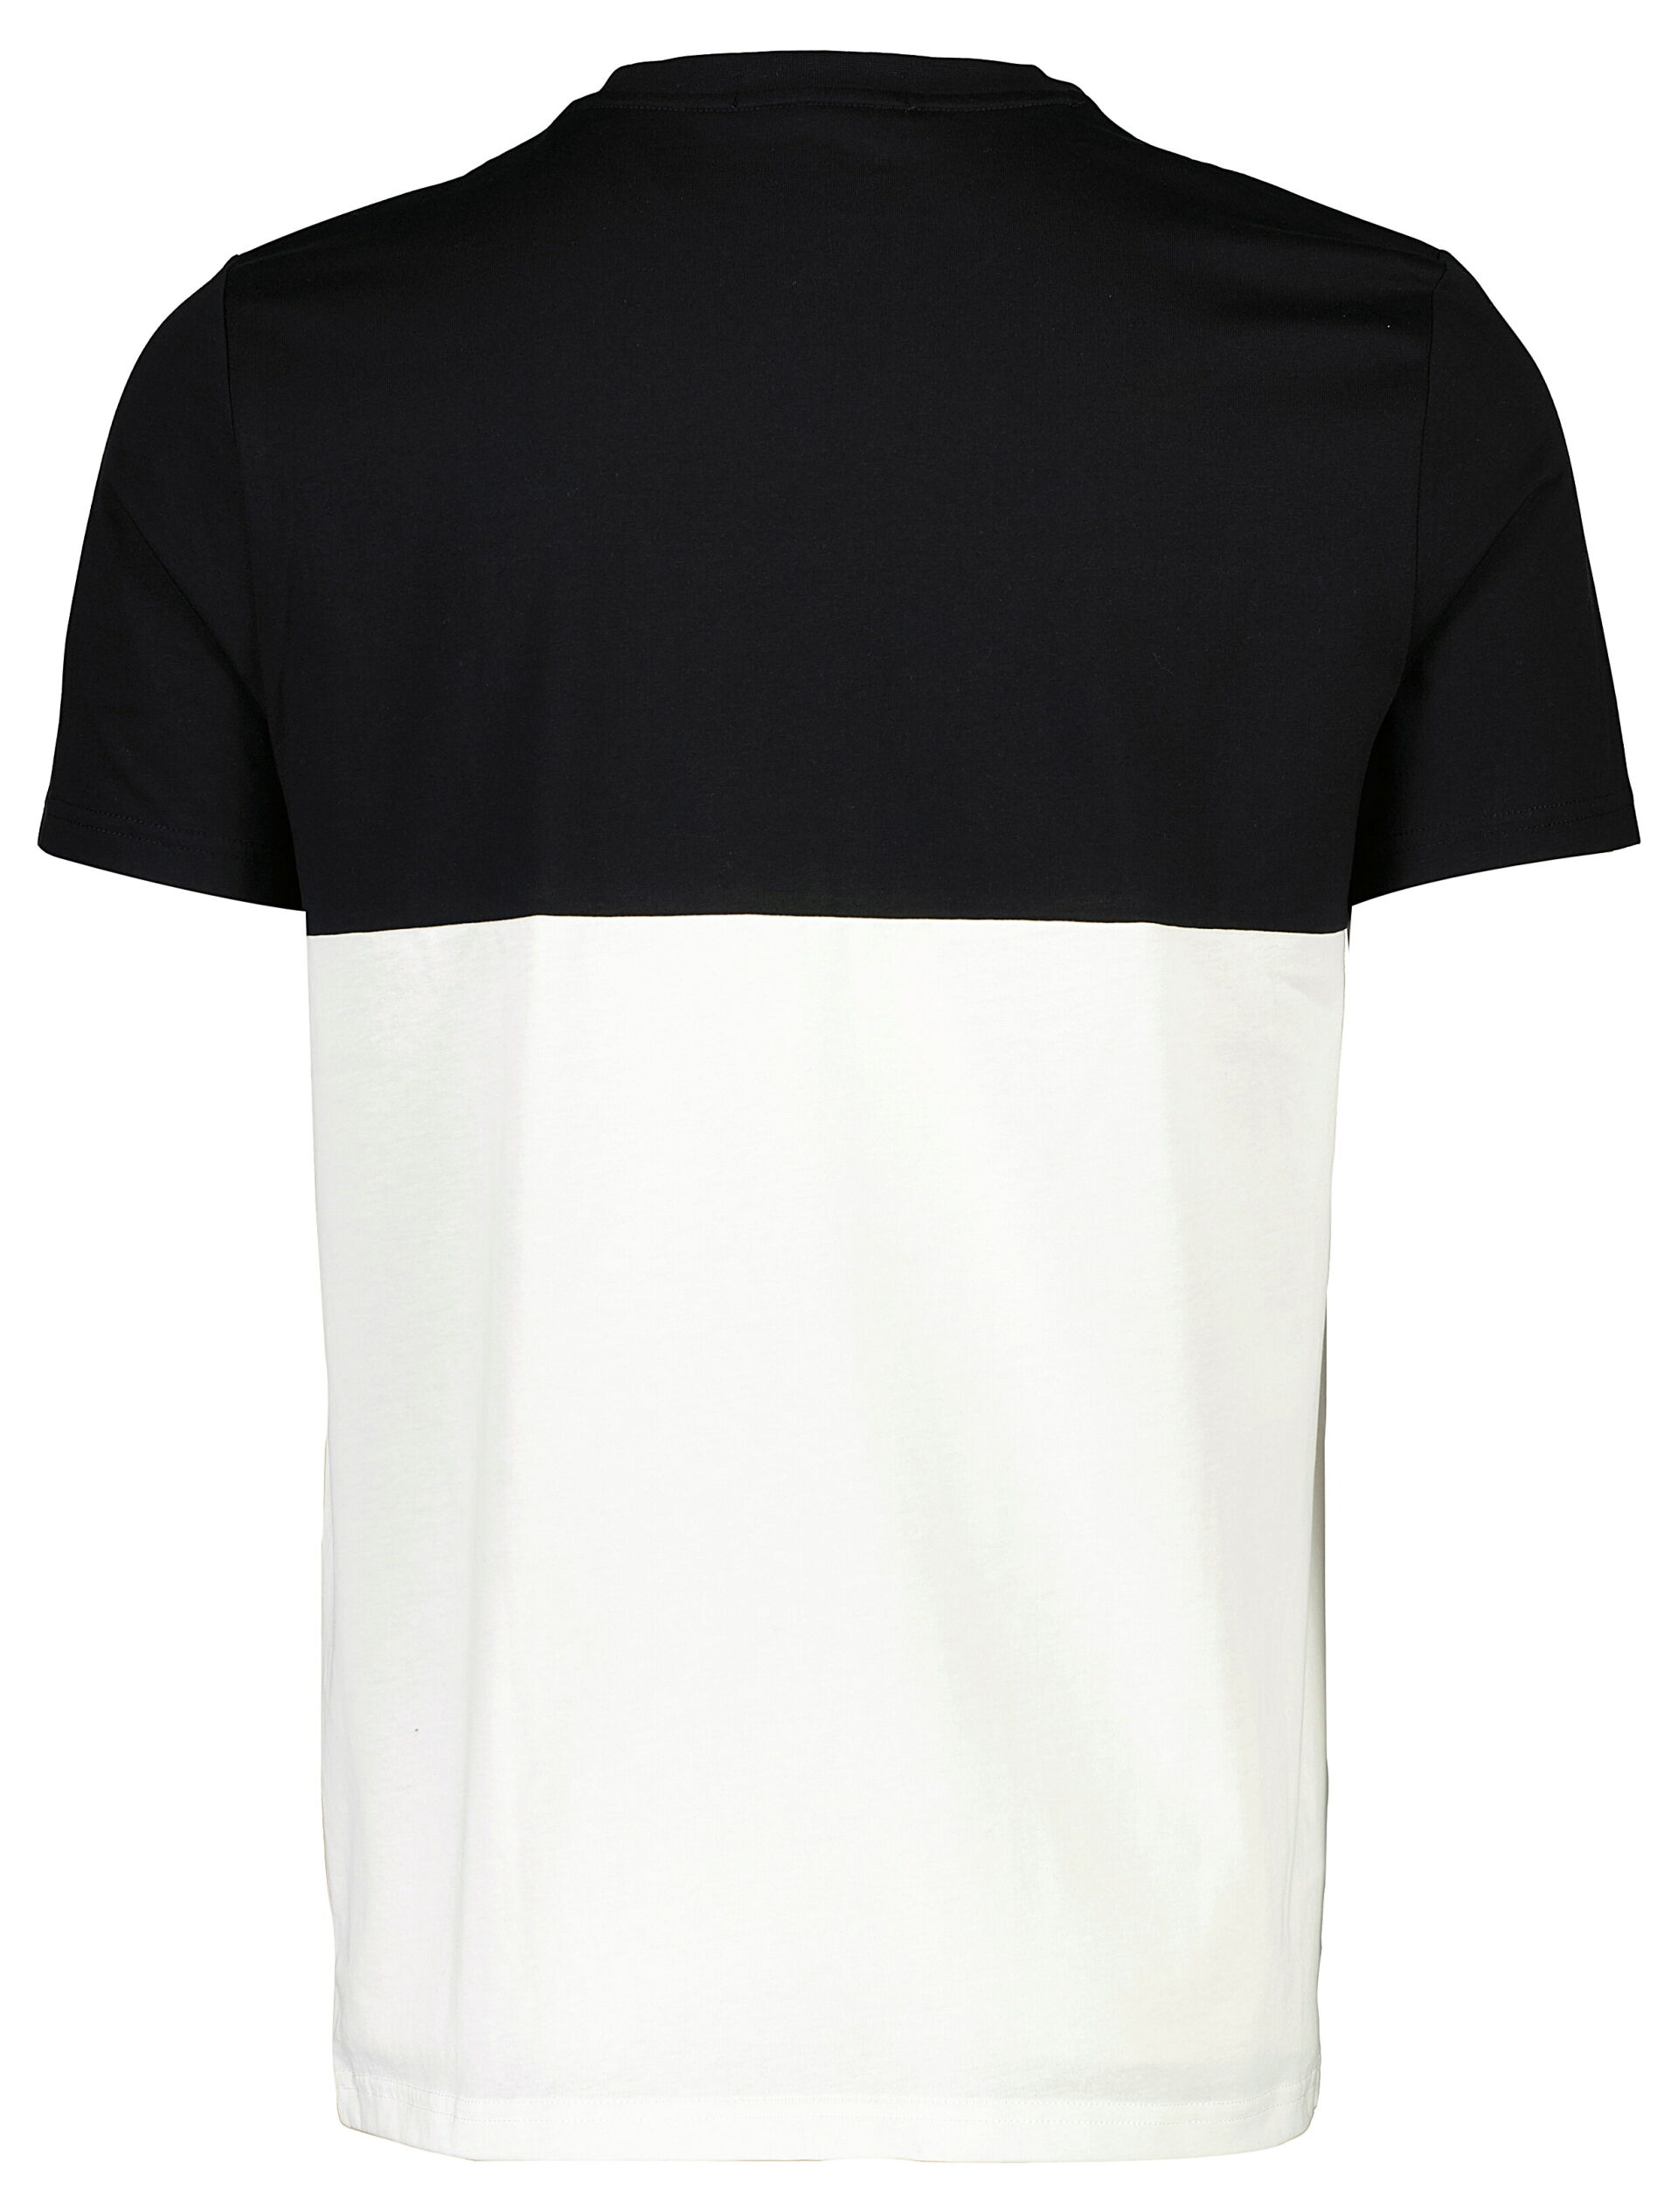 Fred Perry  T-shirt 90-400919